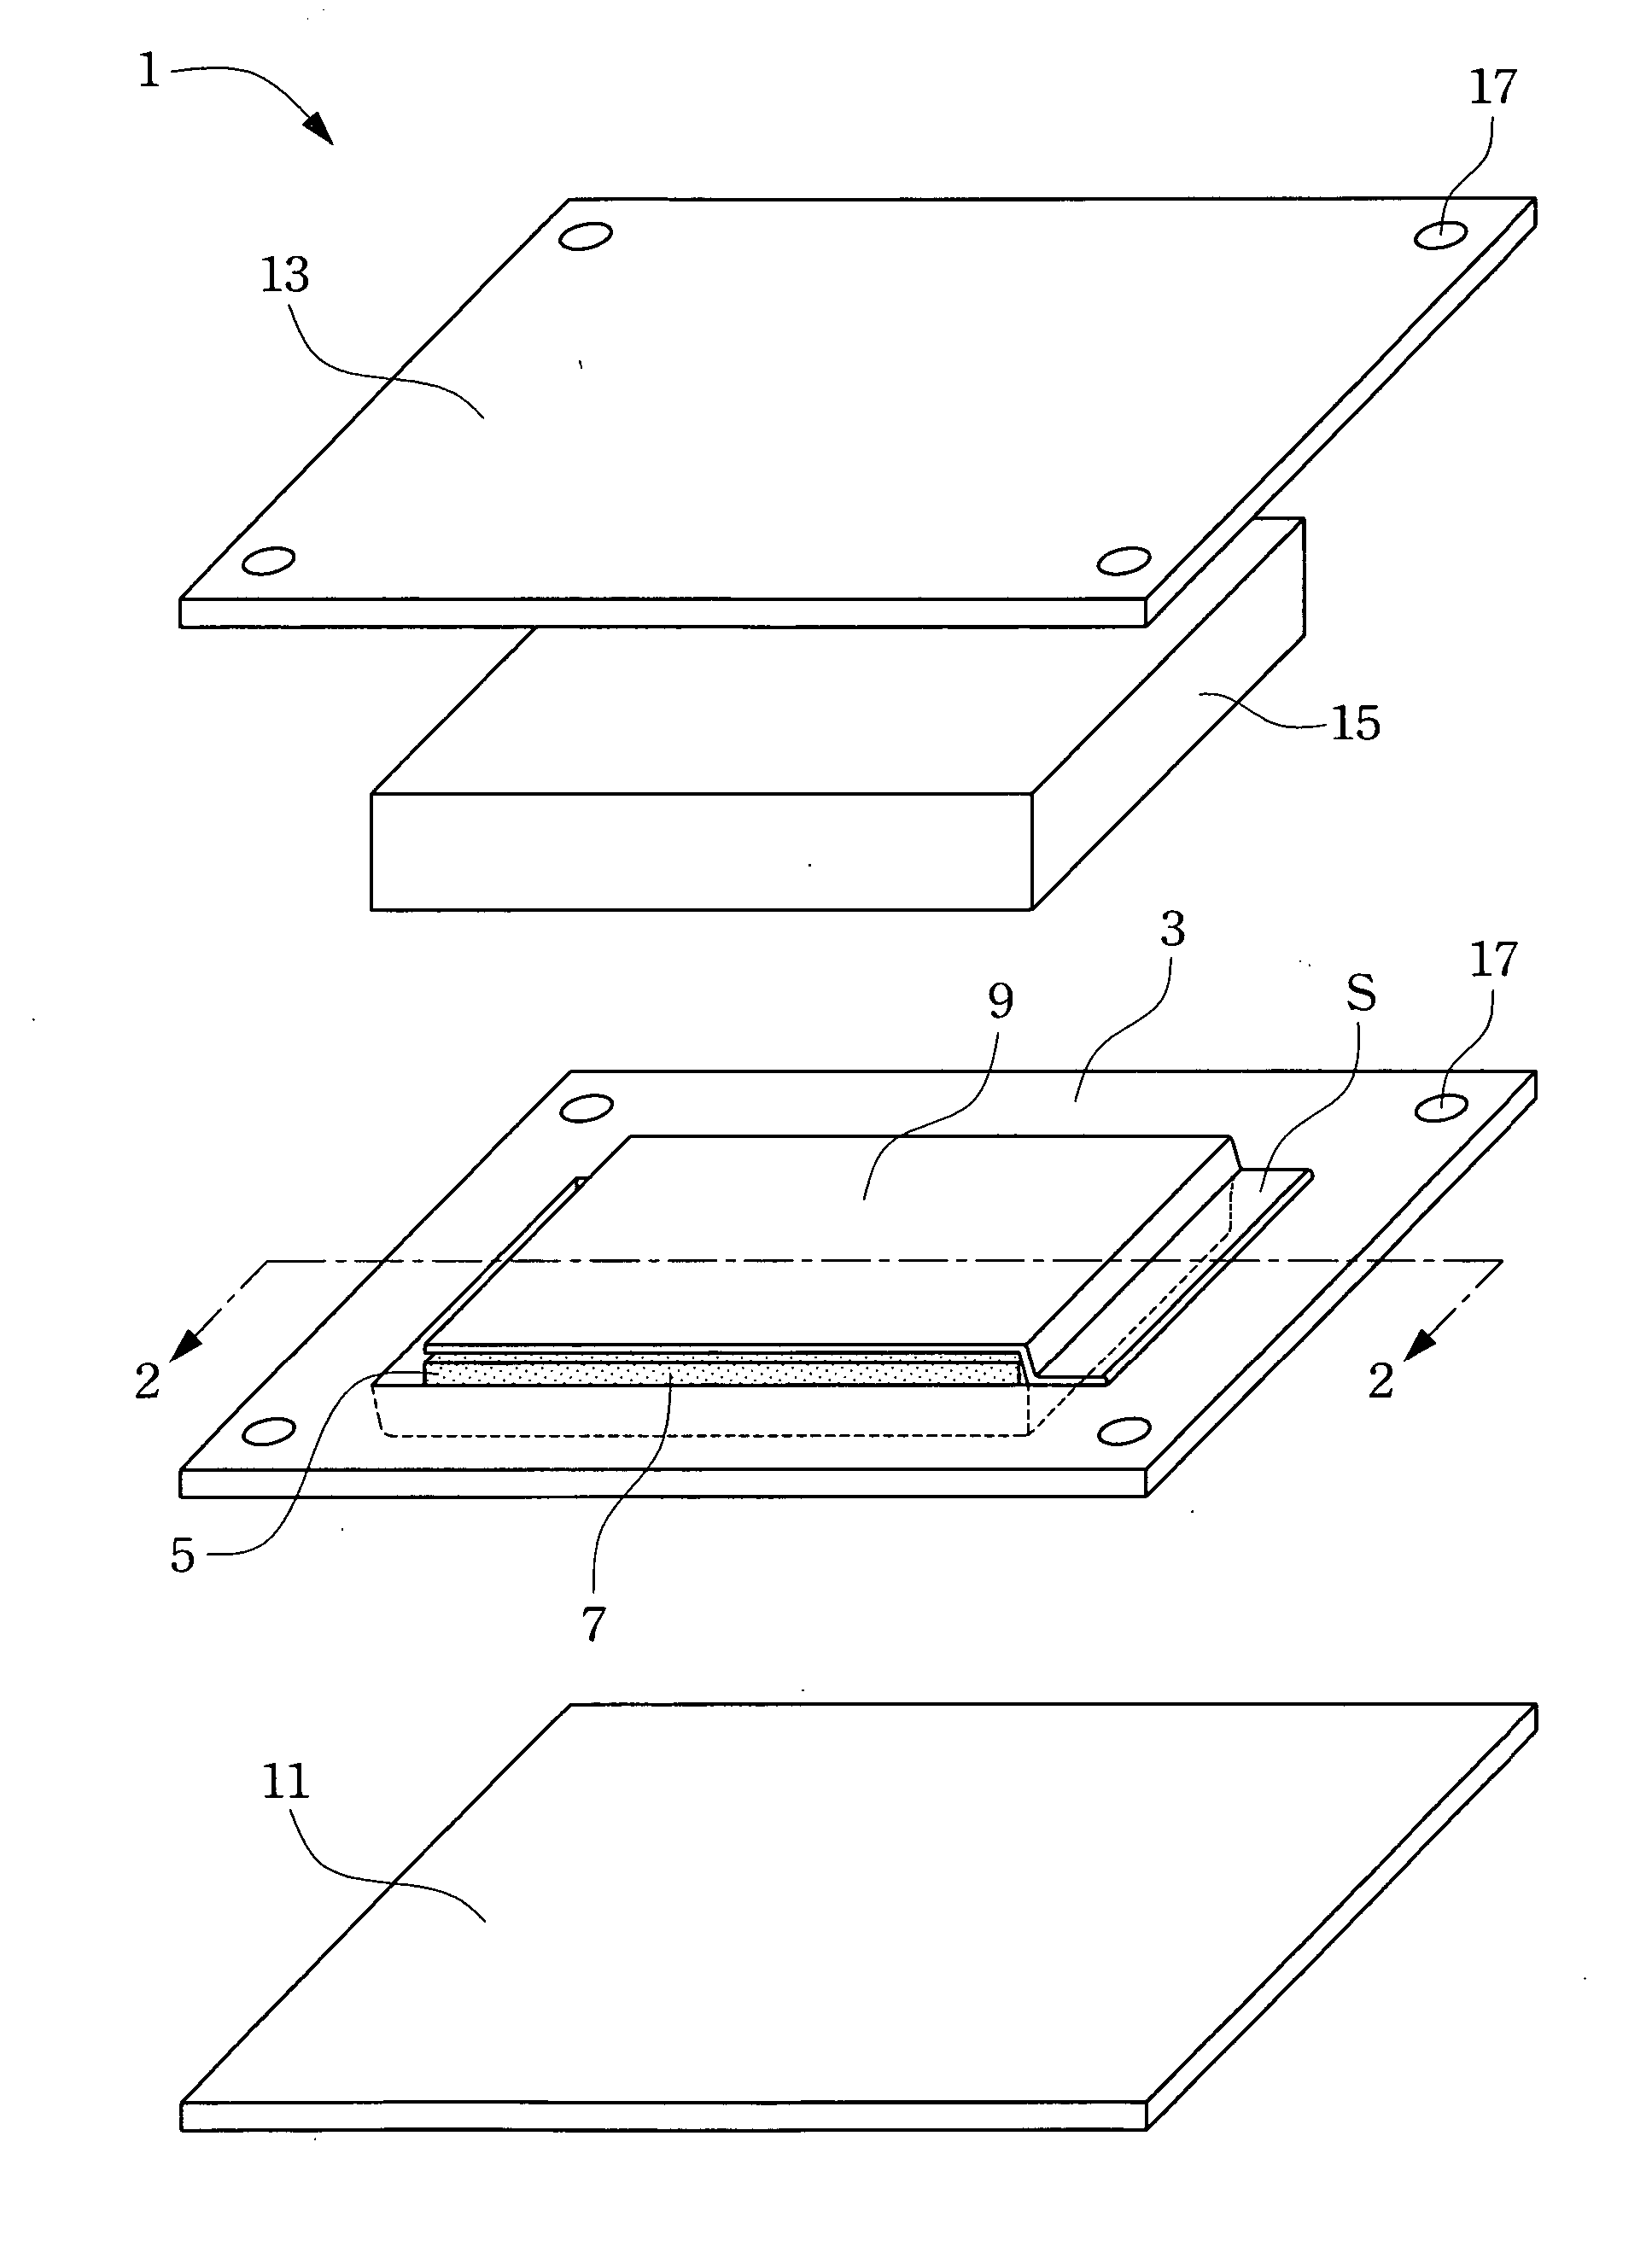 Apparatus for minimizing electromagnetic interferences